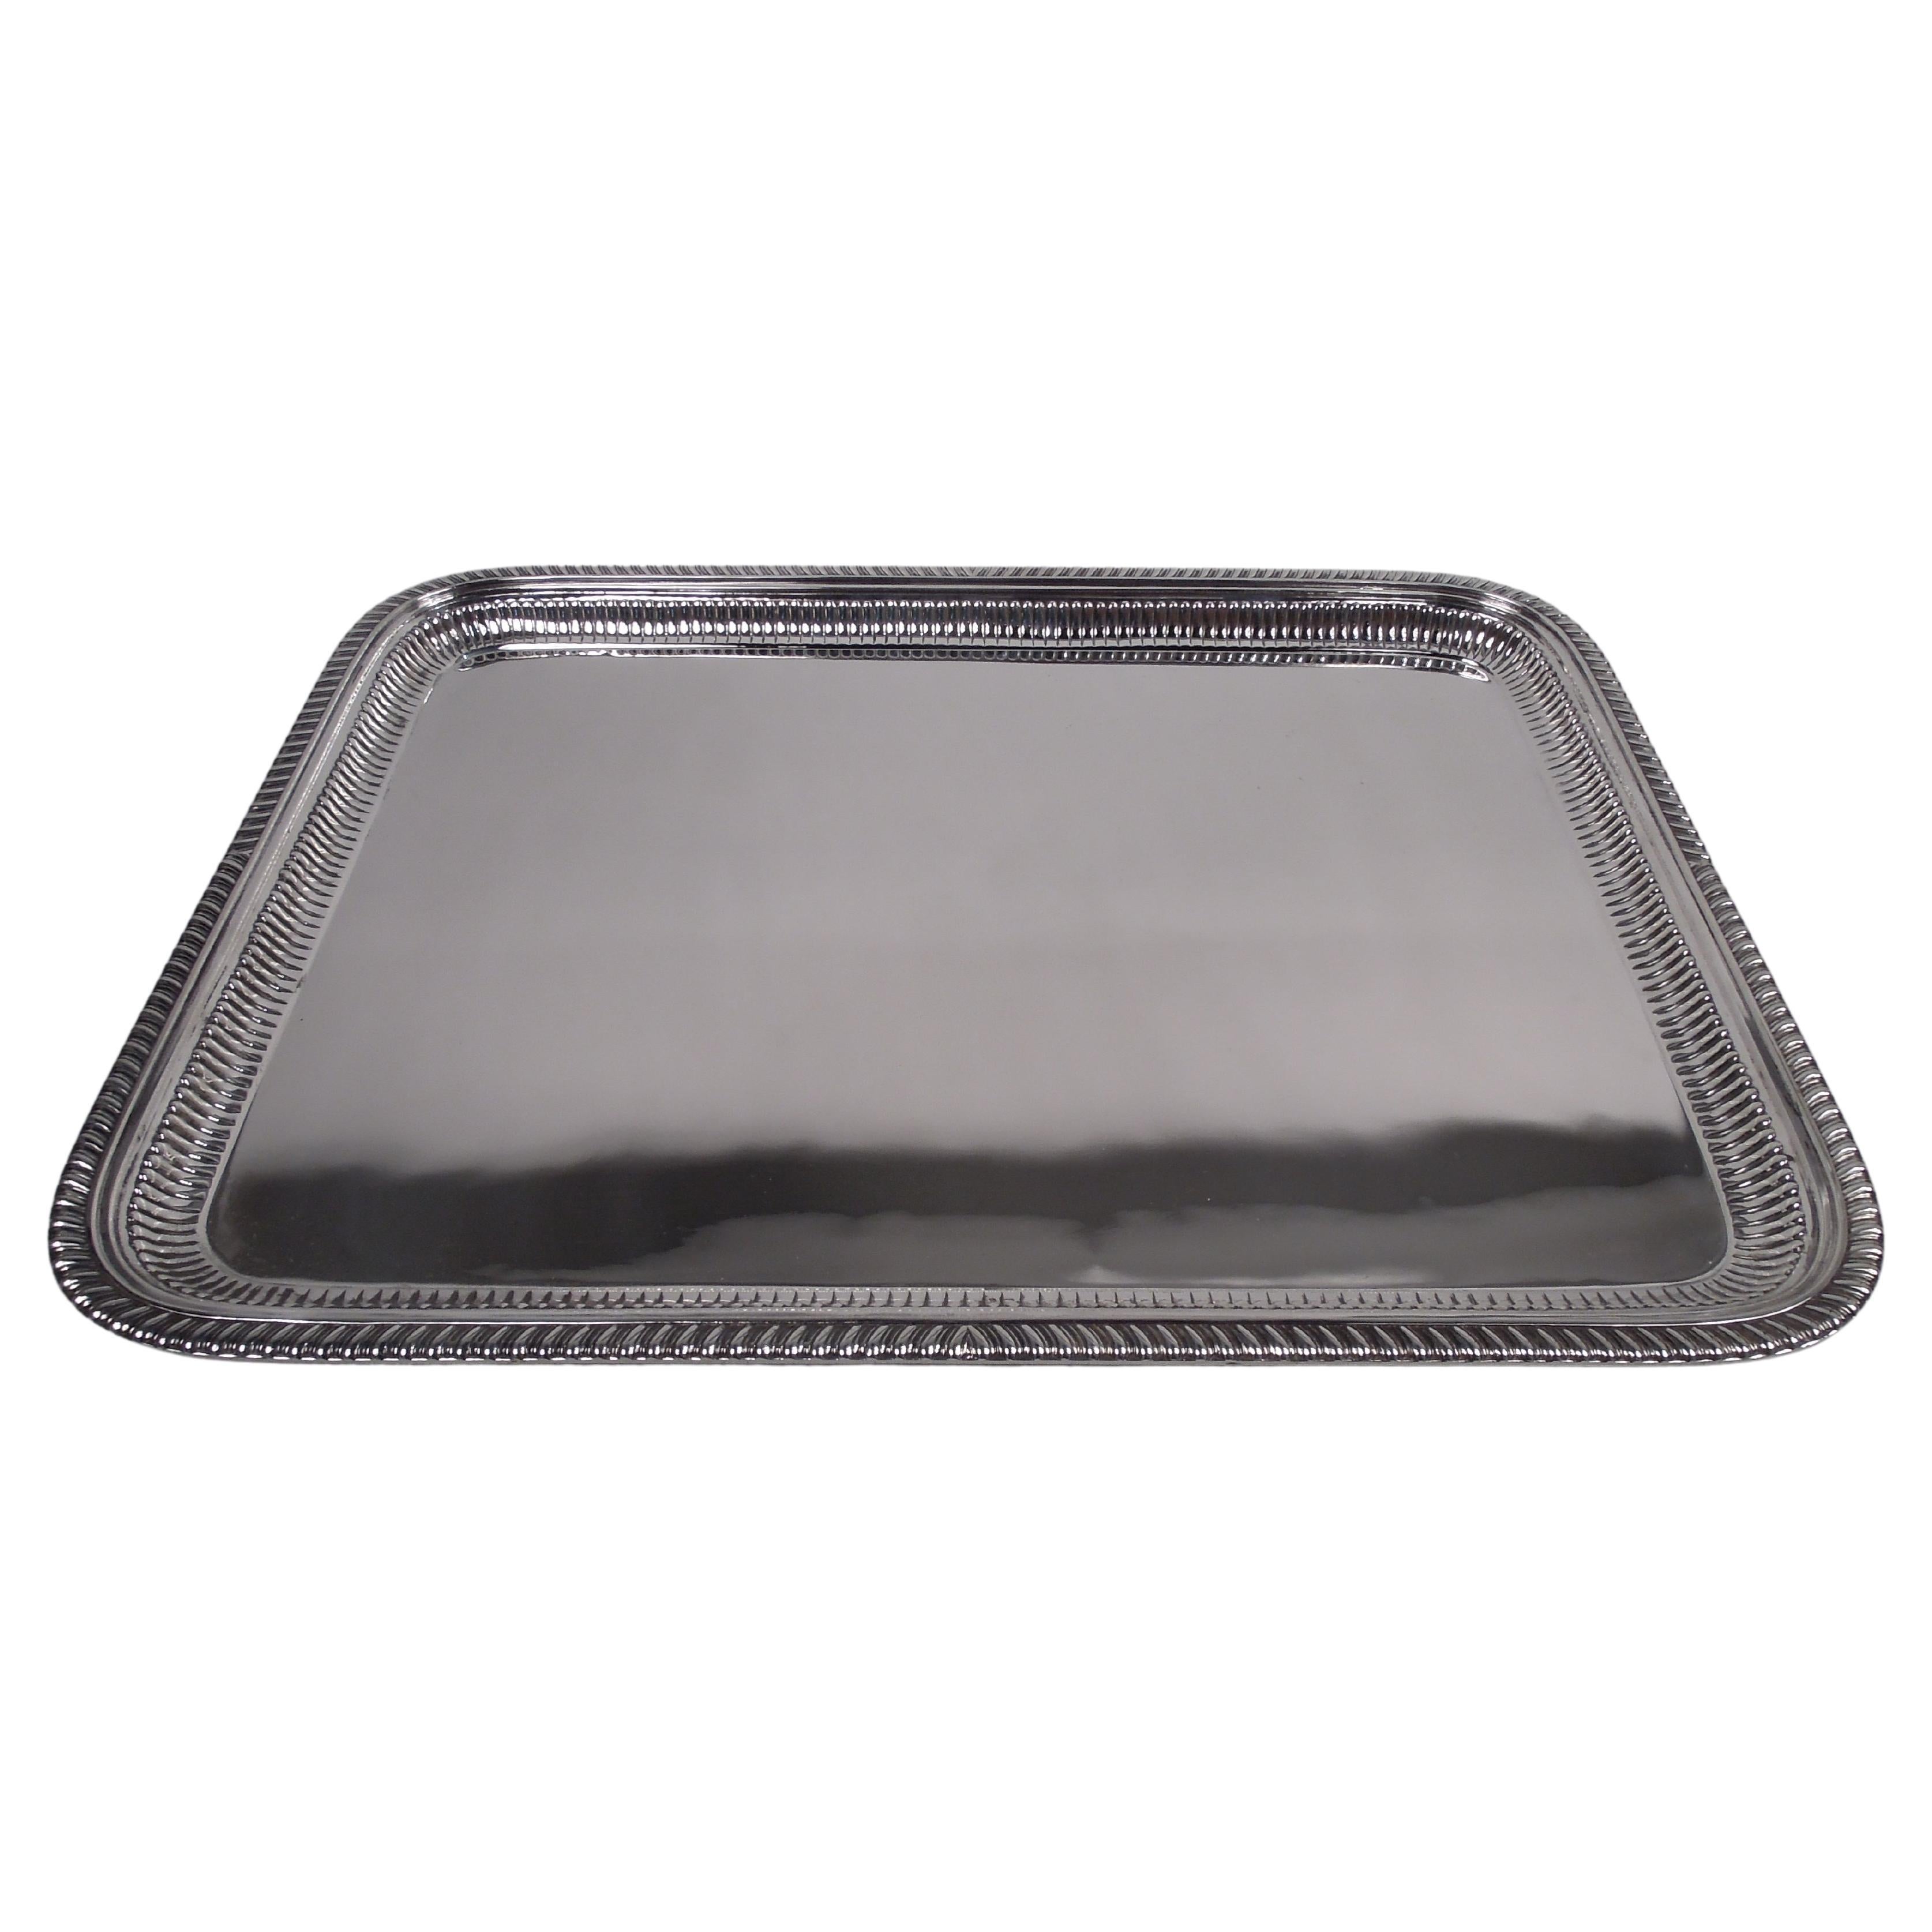 Large Dominick & Haff Victorian Classical Sterling Silver Tray, 1890 For Sale